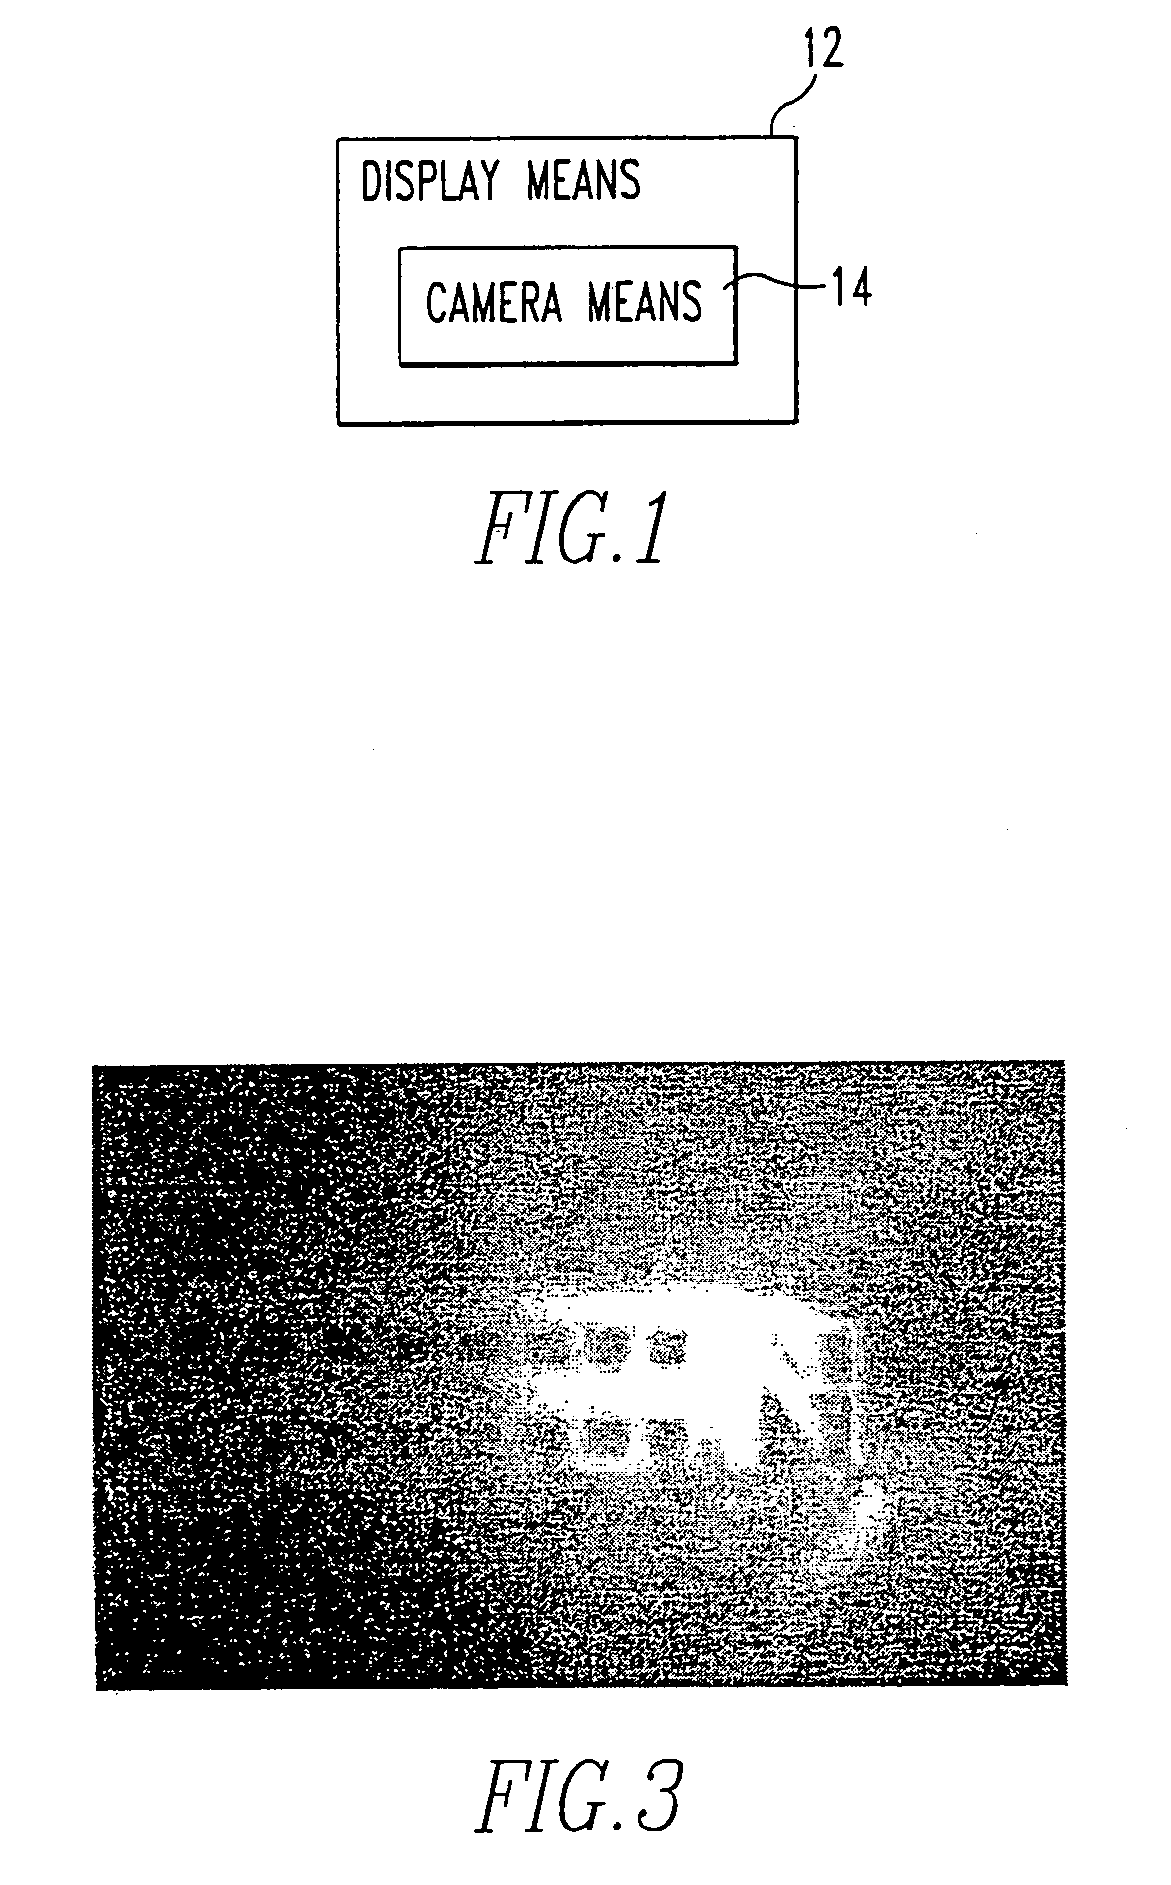 Method and apparatus for displaying images in combination with taking images